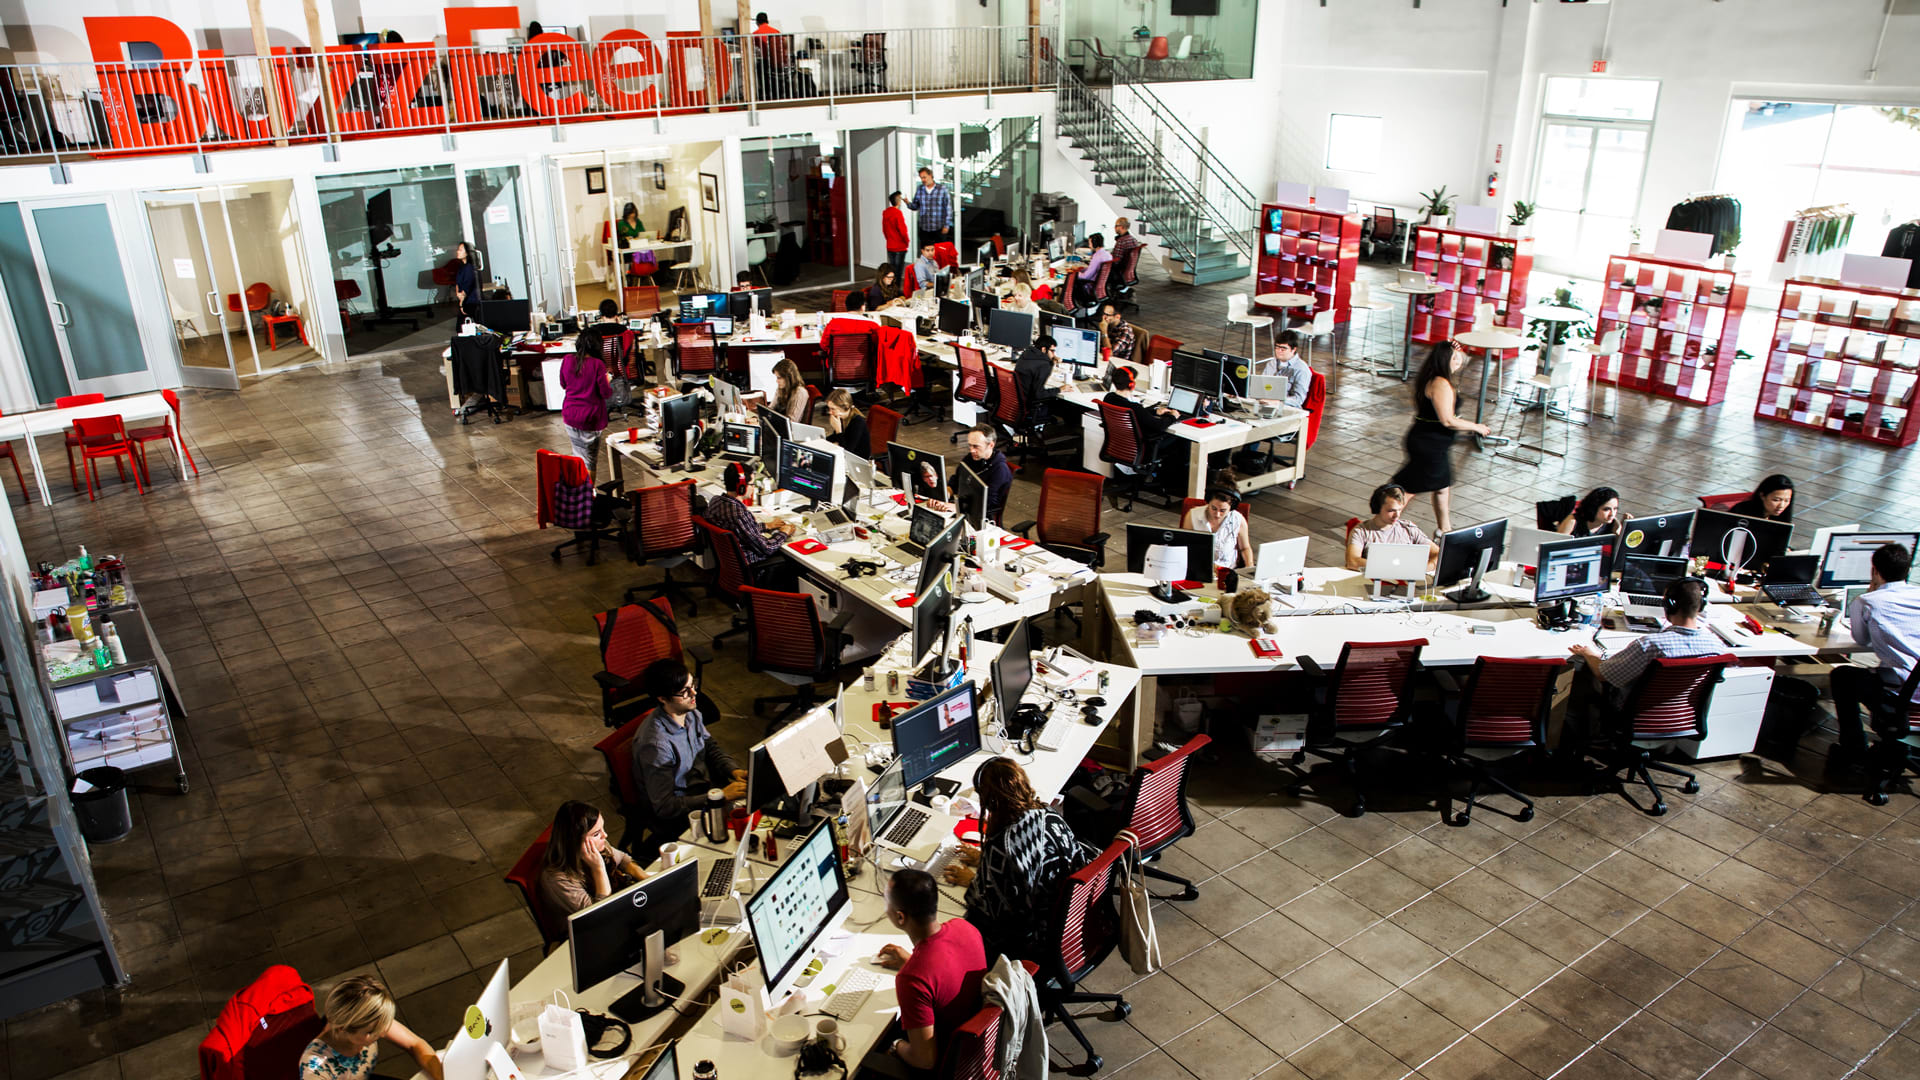 BuzzFeed’s layoffs and the false promise of “unions aren’t for us”